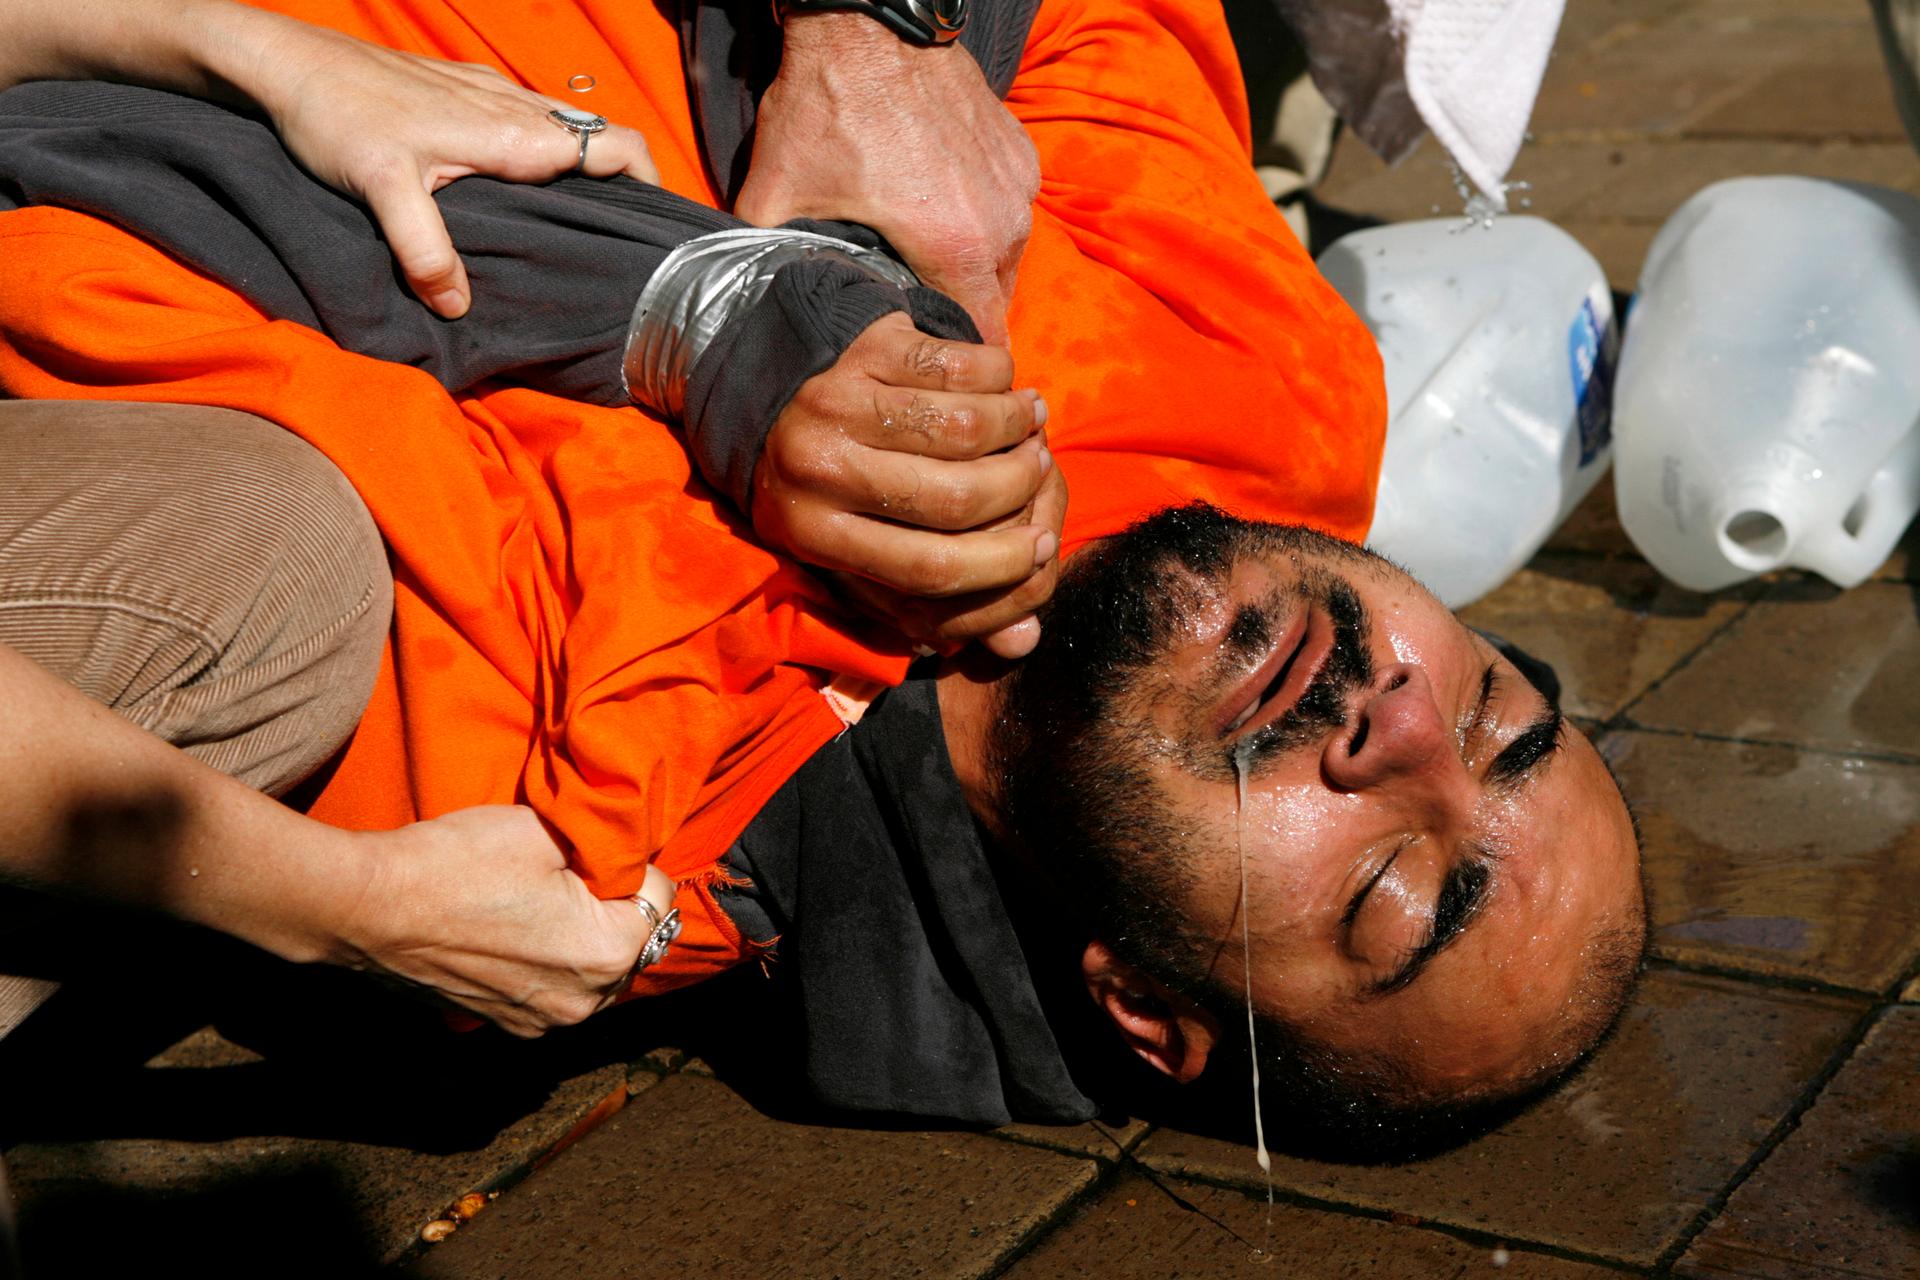 A demonstrator is held down during a simulation of waterboarding outside the Justice Department in 2007.